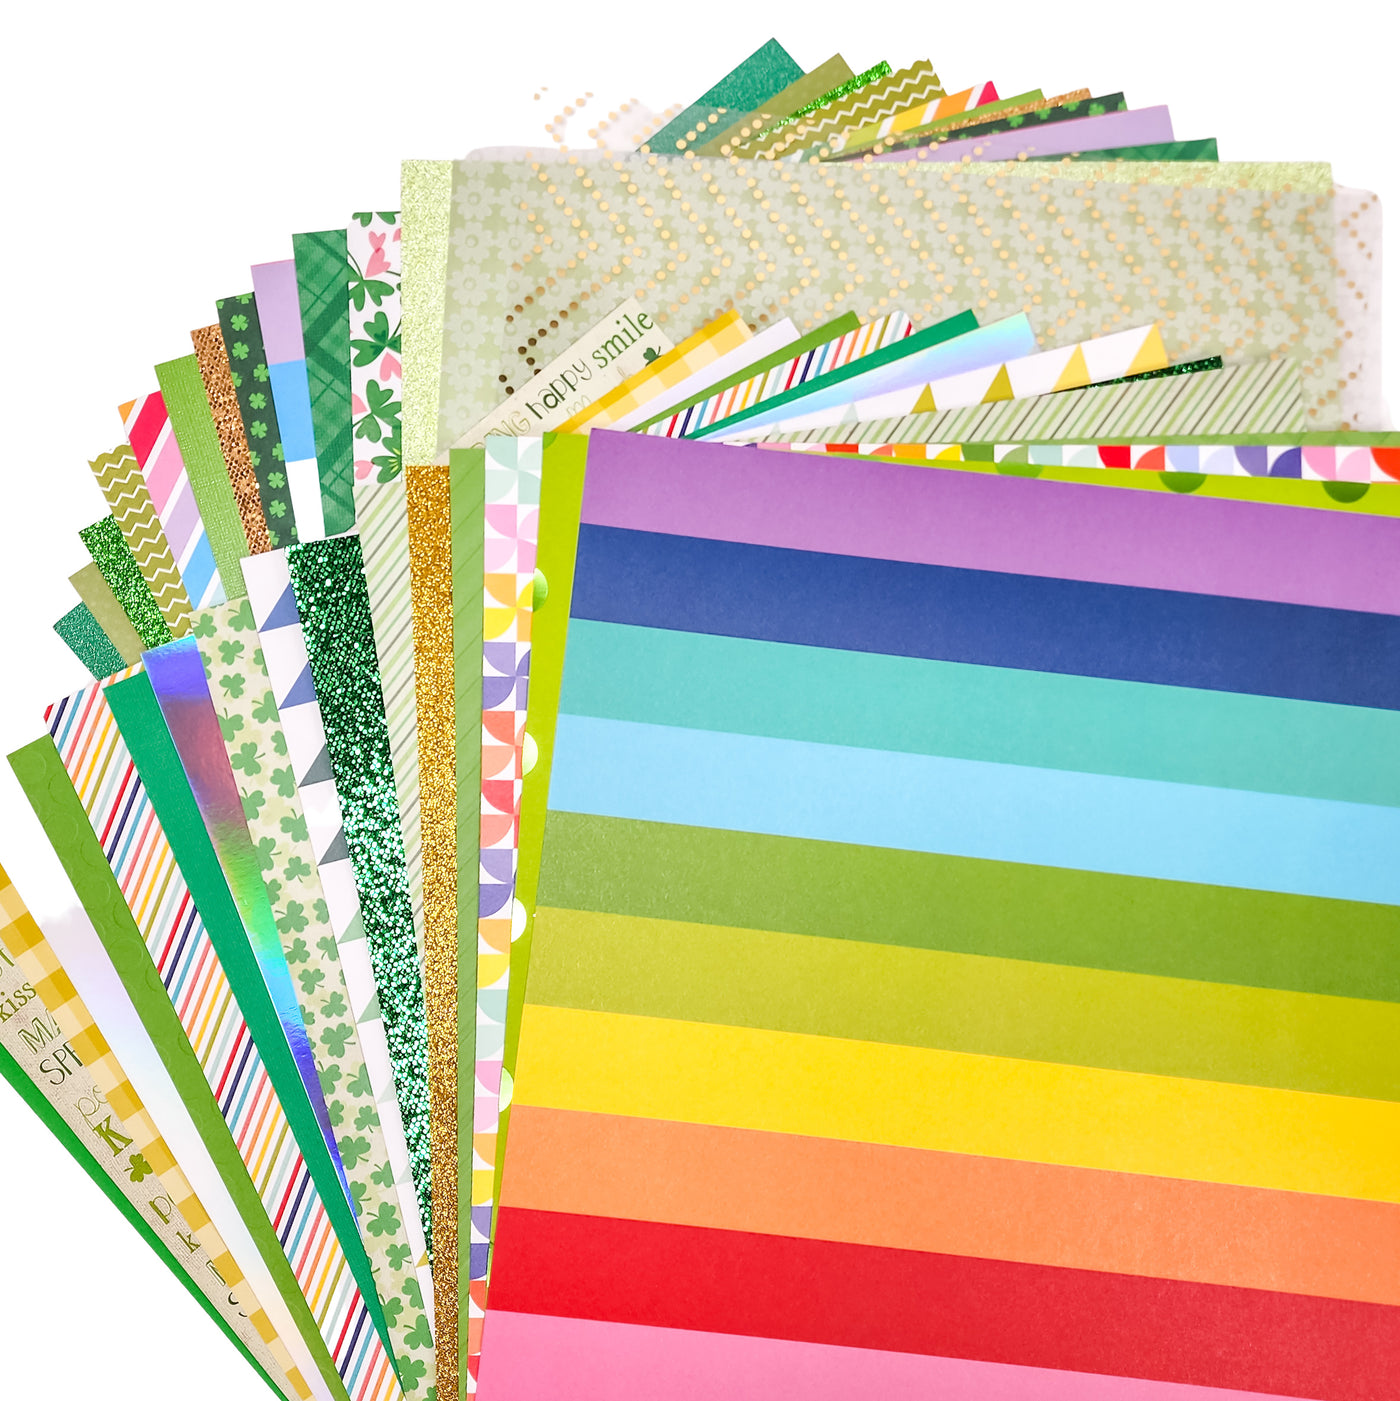 The Pinch Me Patterned Paper Variety Pack includes 30 sheets of cardstock and pattern paper for St. Patrick's Day projects. Includes shamrocks and rainbow patterns, glitter accents, and more. 